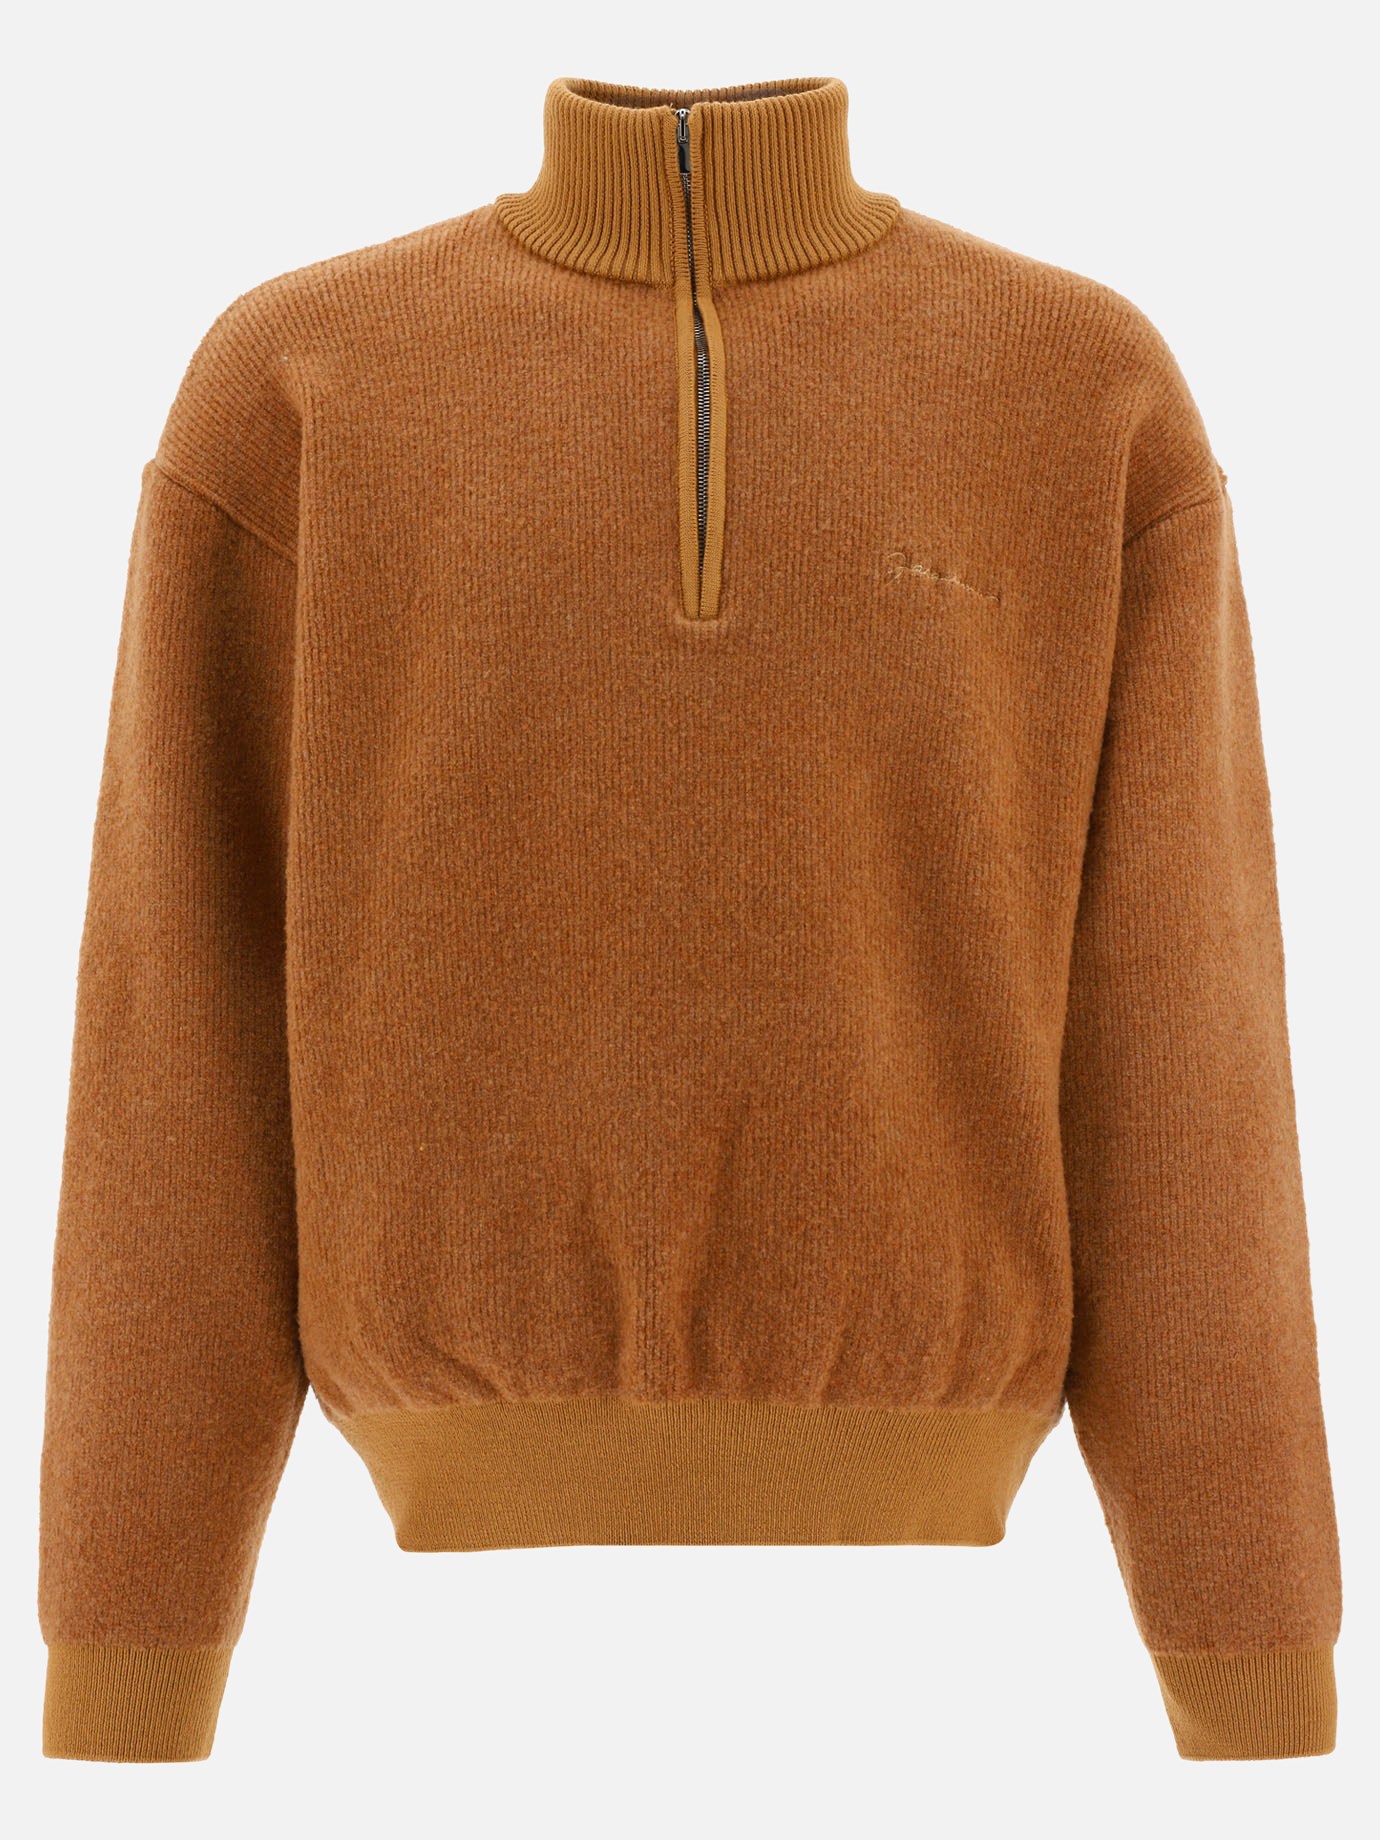  La Maille Berger  sweaterby Jacquemus - 0